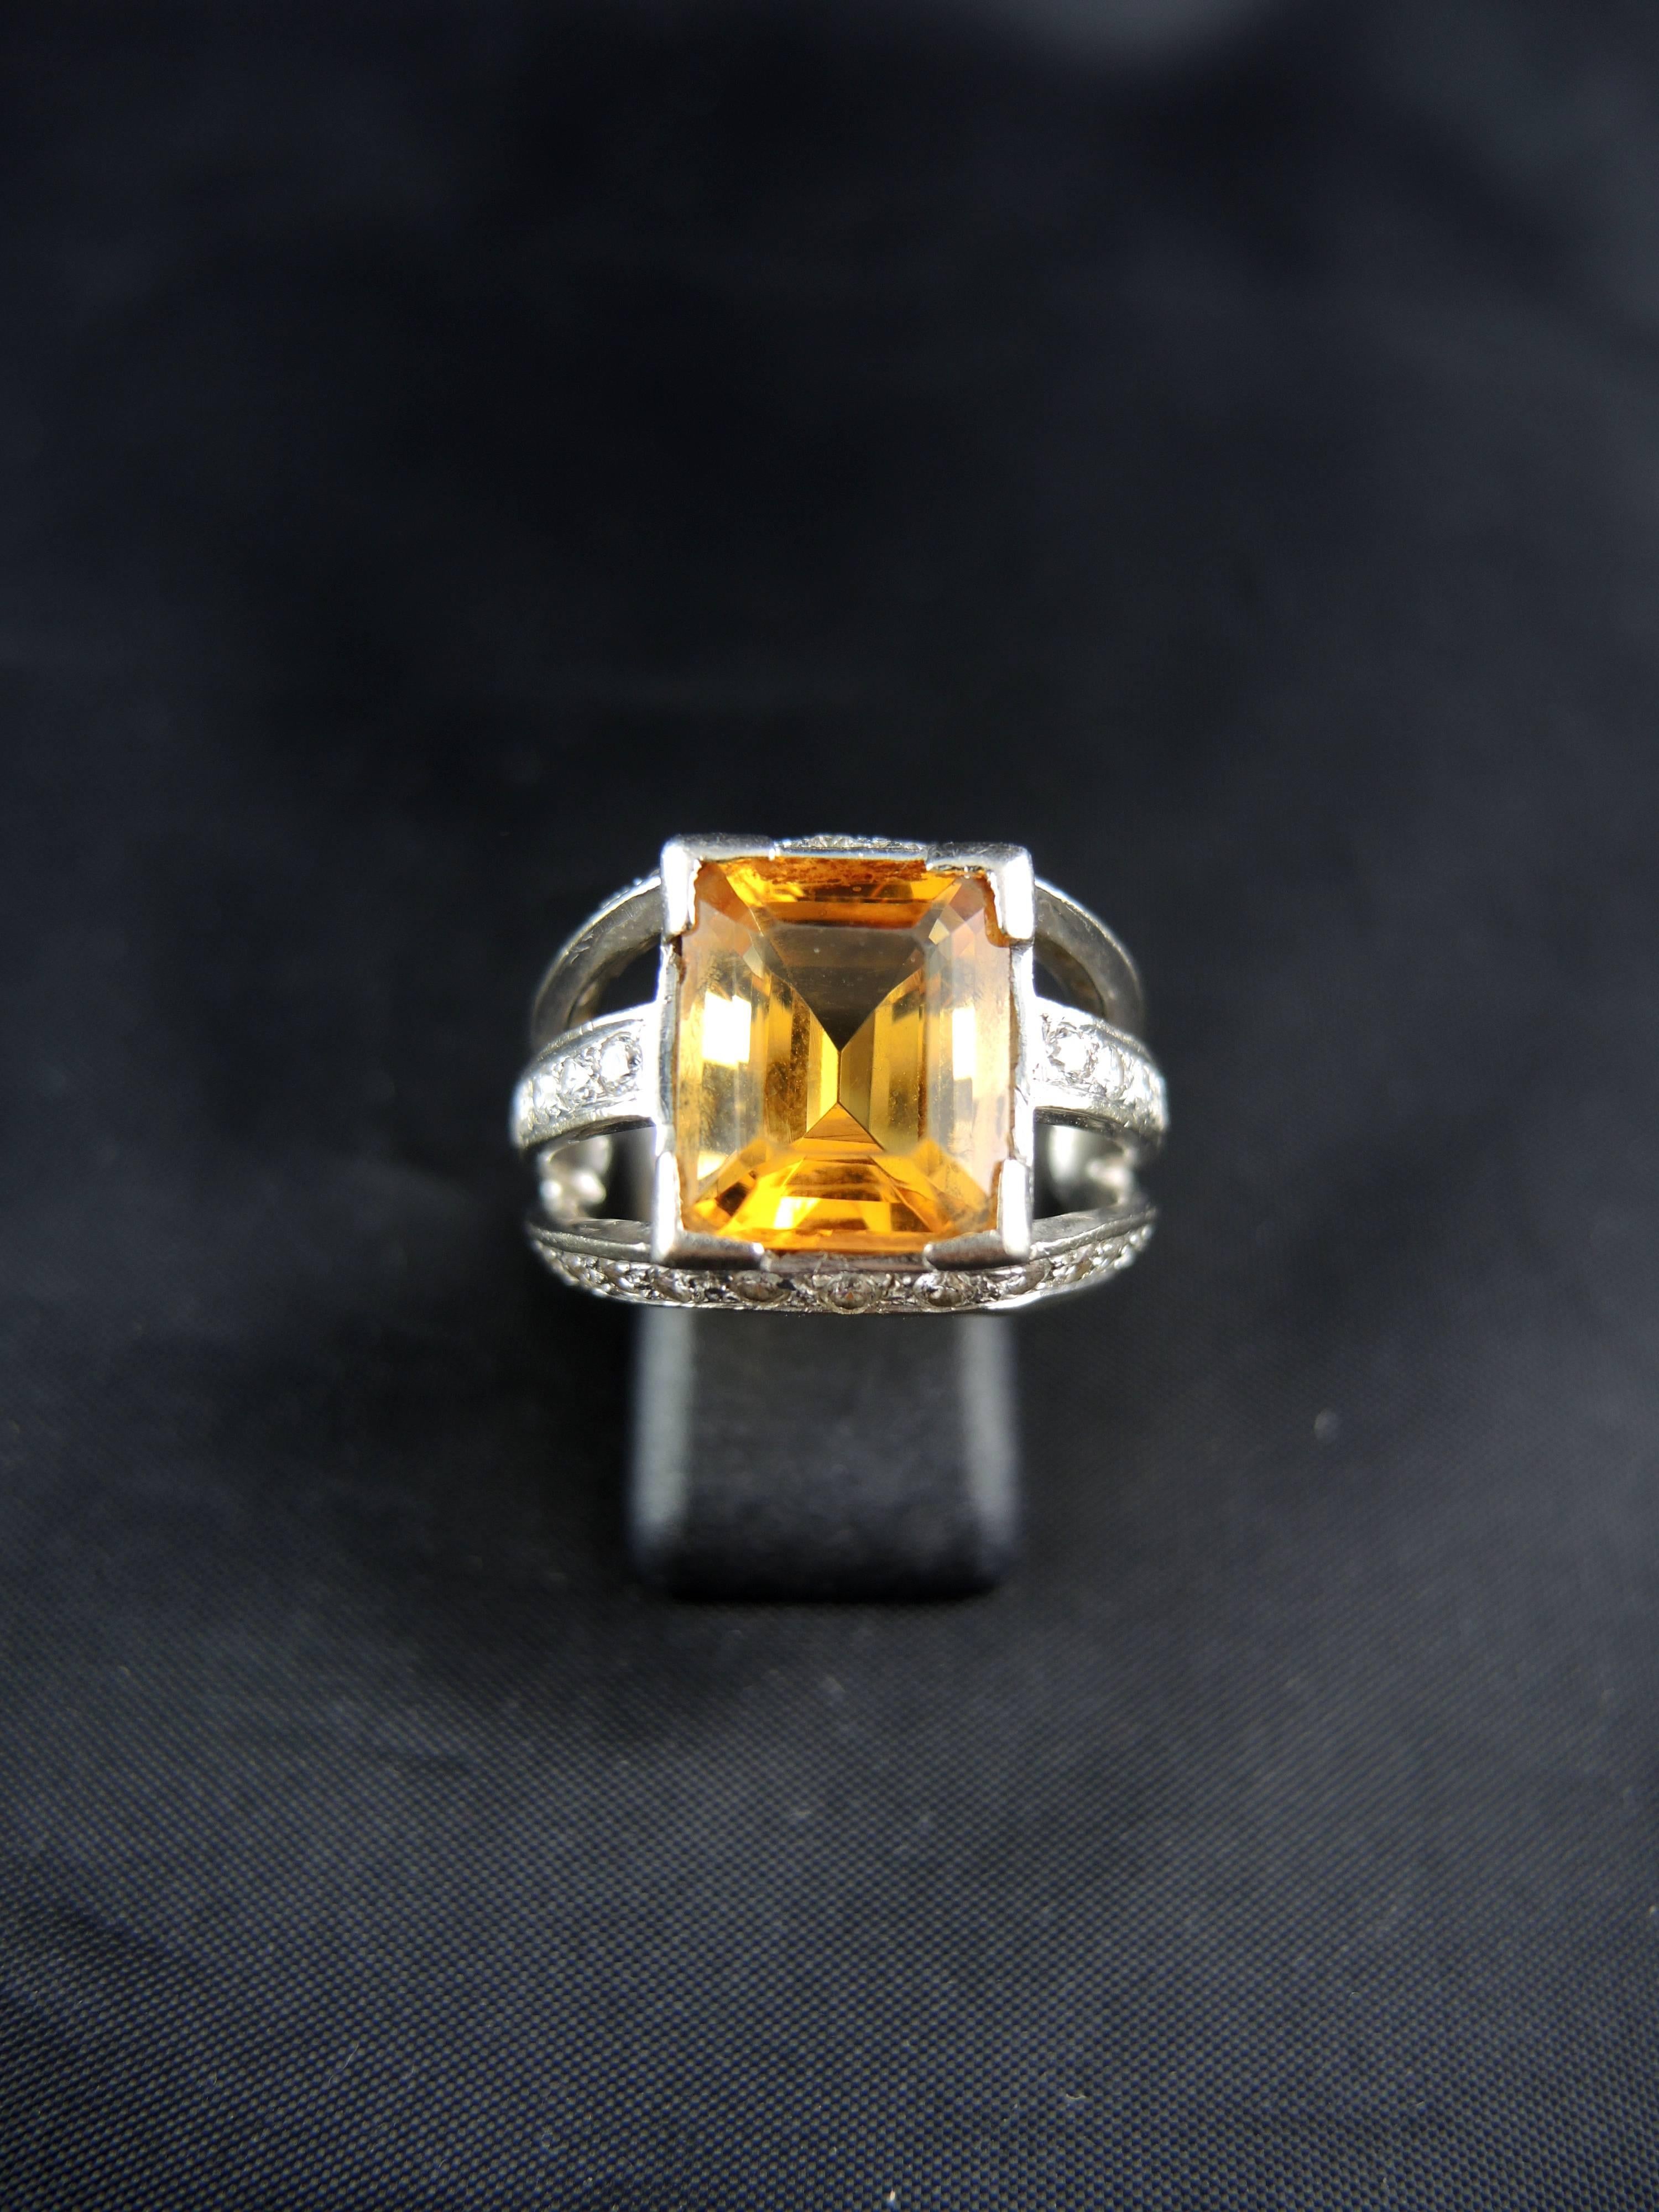 18kt white gold ring (quality mark: eagle's head) set with a central citrine, weighting apx 5.00 Cts, and modern round cut diamonds, which total weight is apx 1.25 Cts.
Because the citrine do not have any inclusions, we cannot affirm if it is